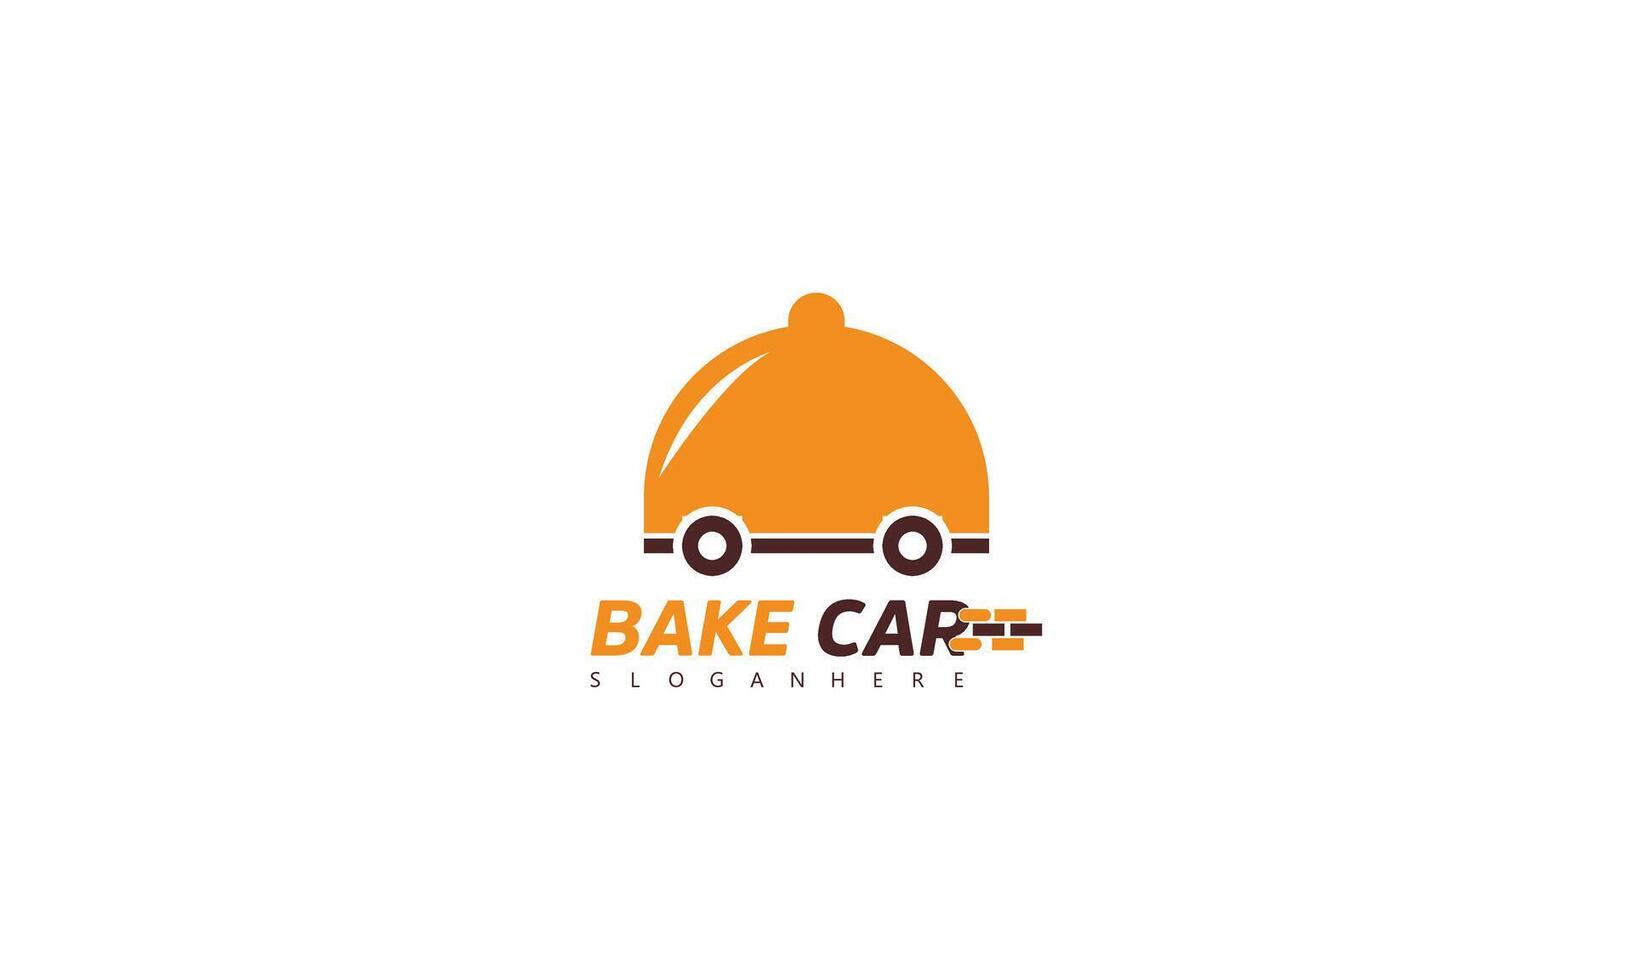 Bakery and Cake Vintage Logo Design Vector Template